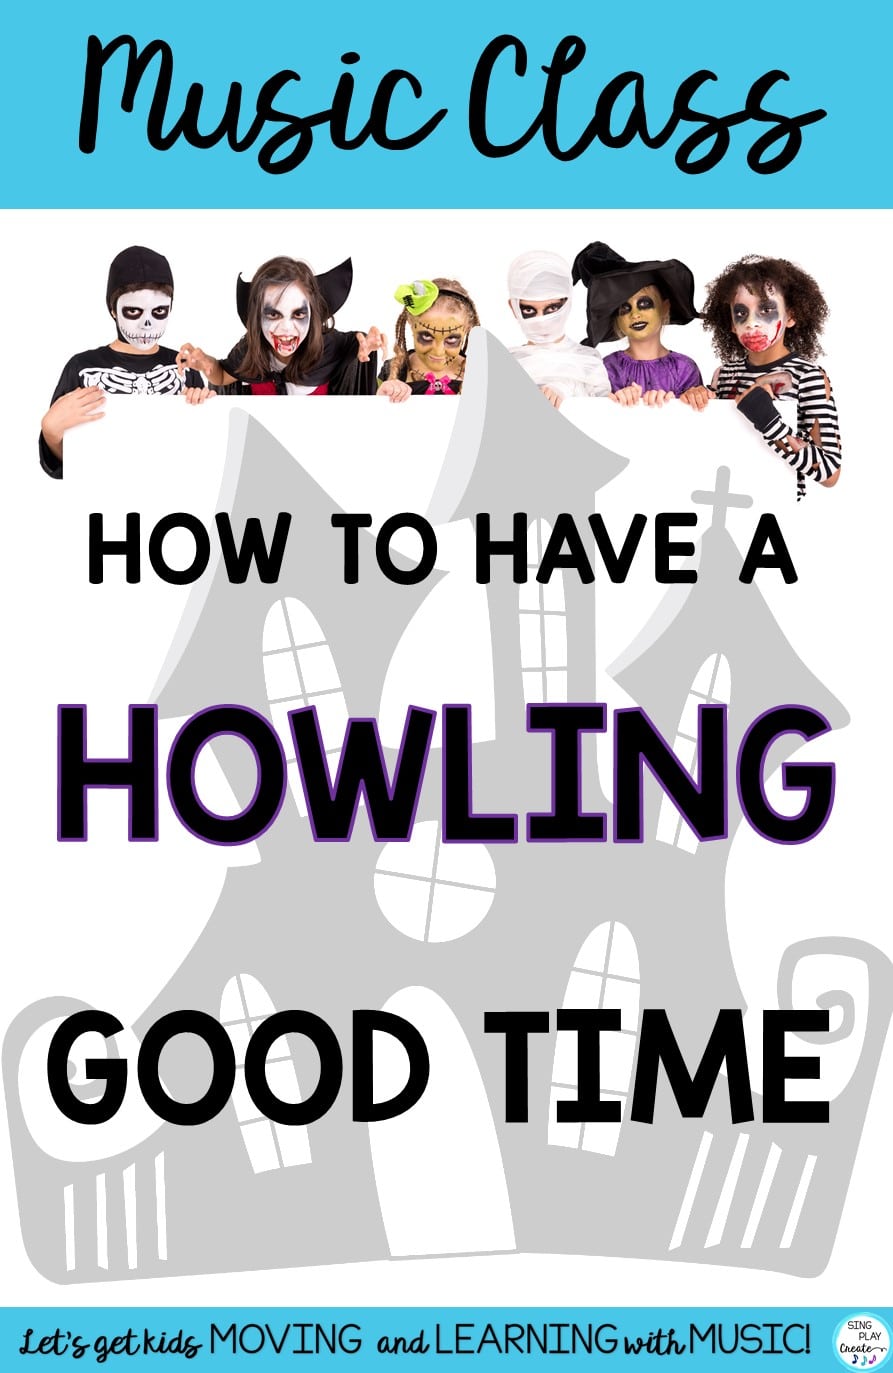 How To Have A Howling Good Time in Music Class